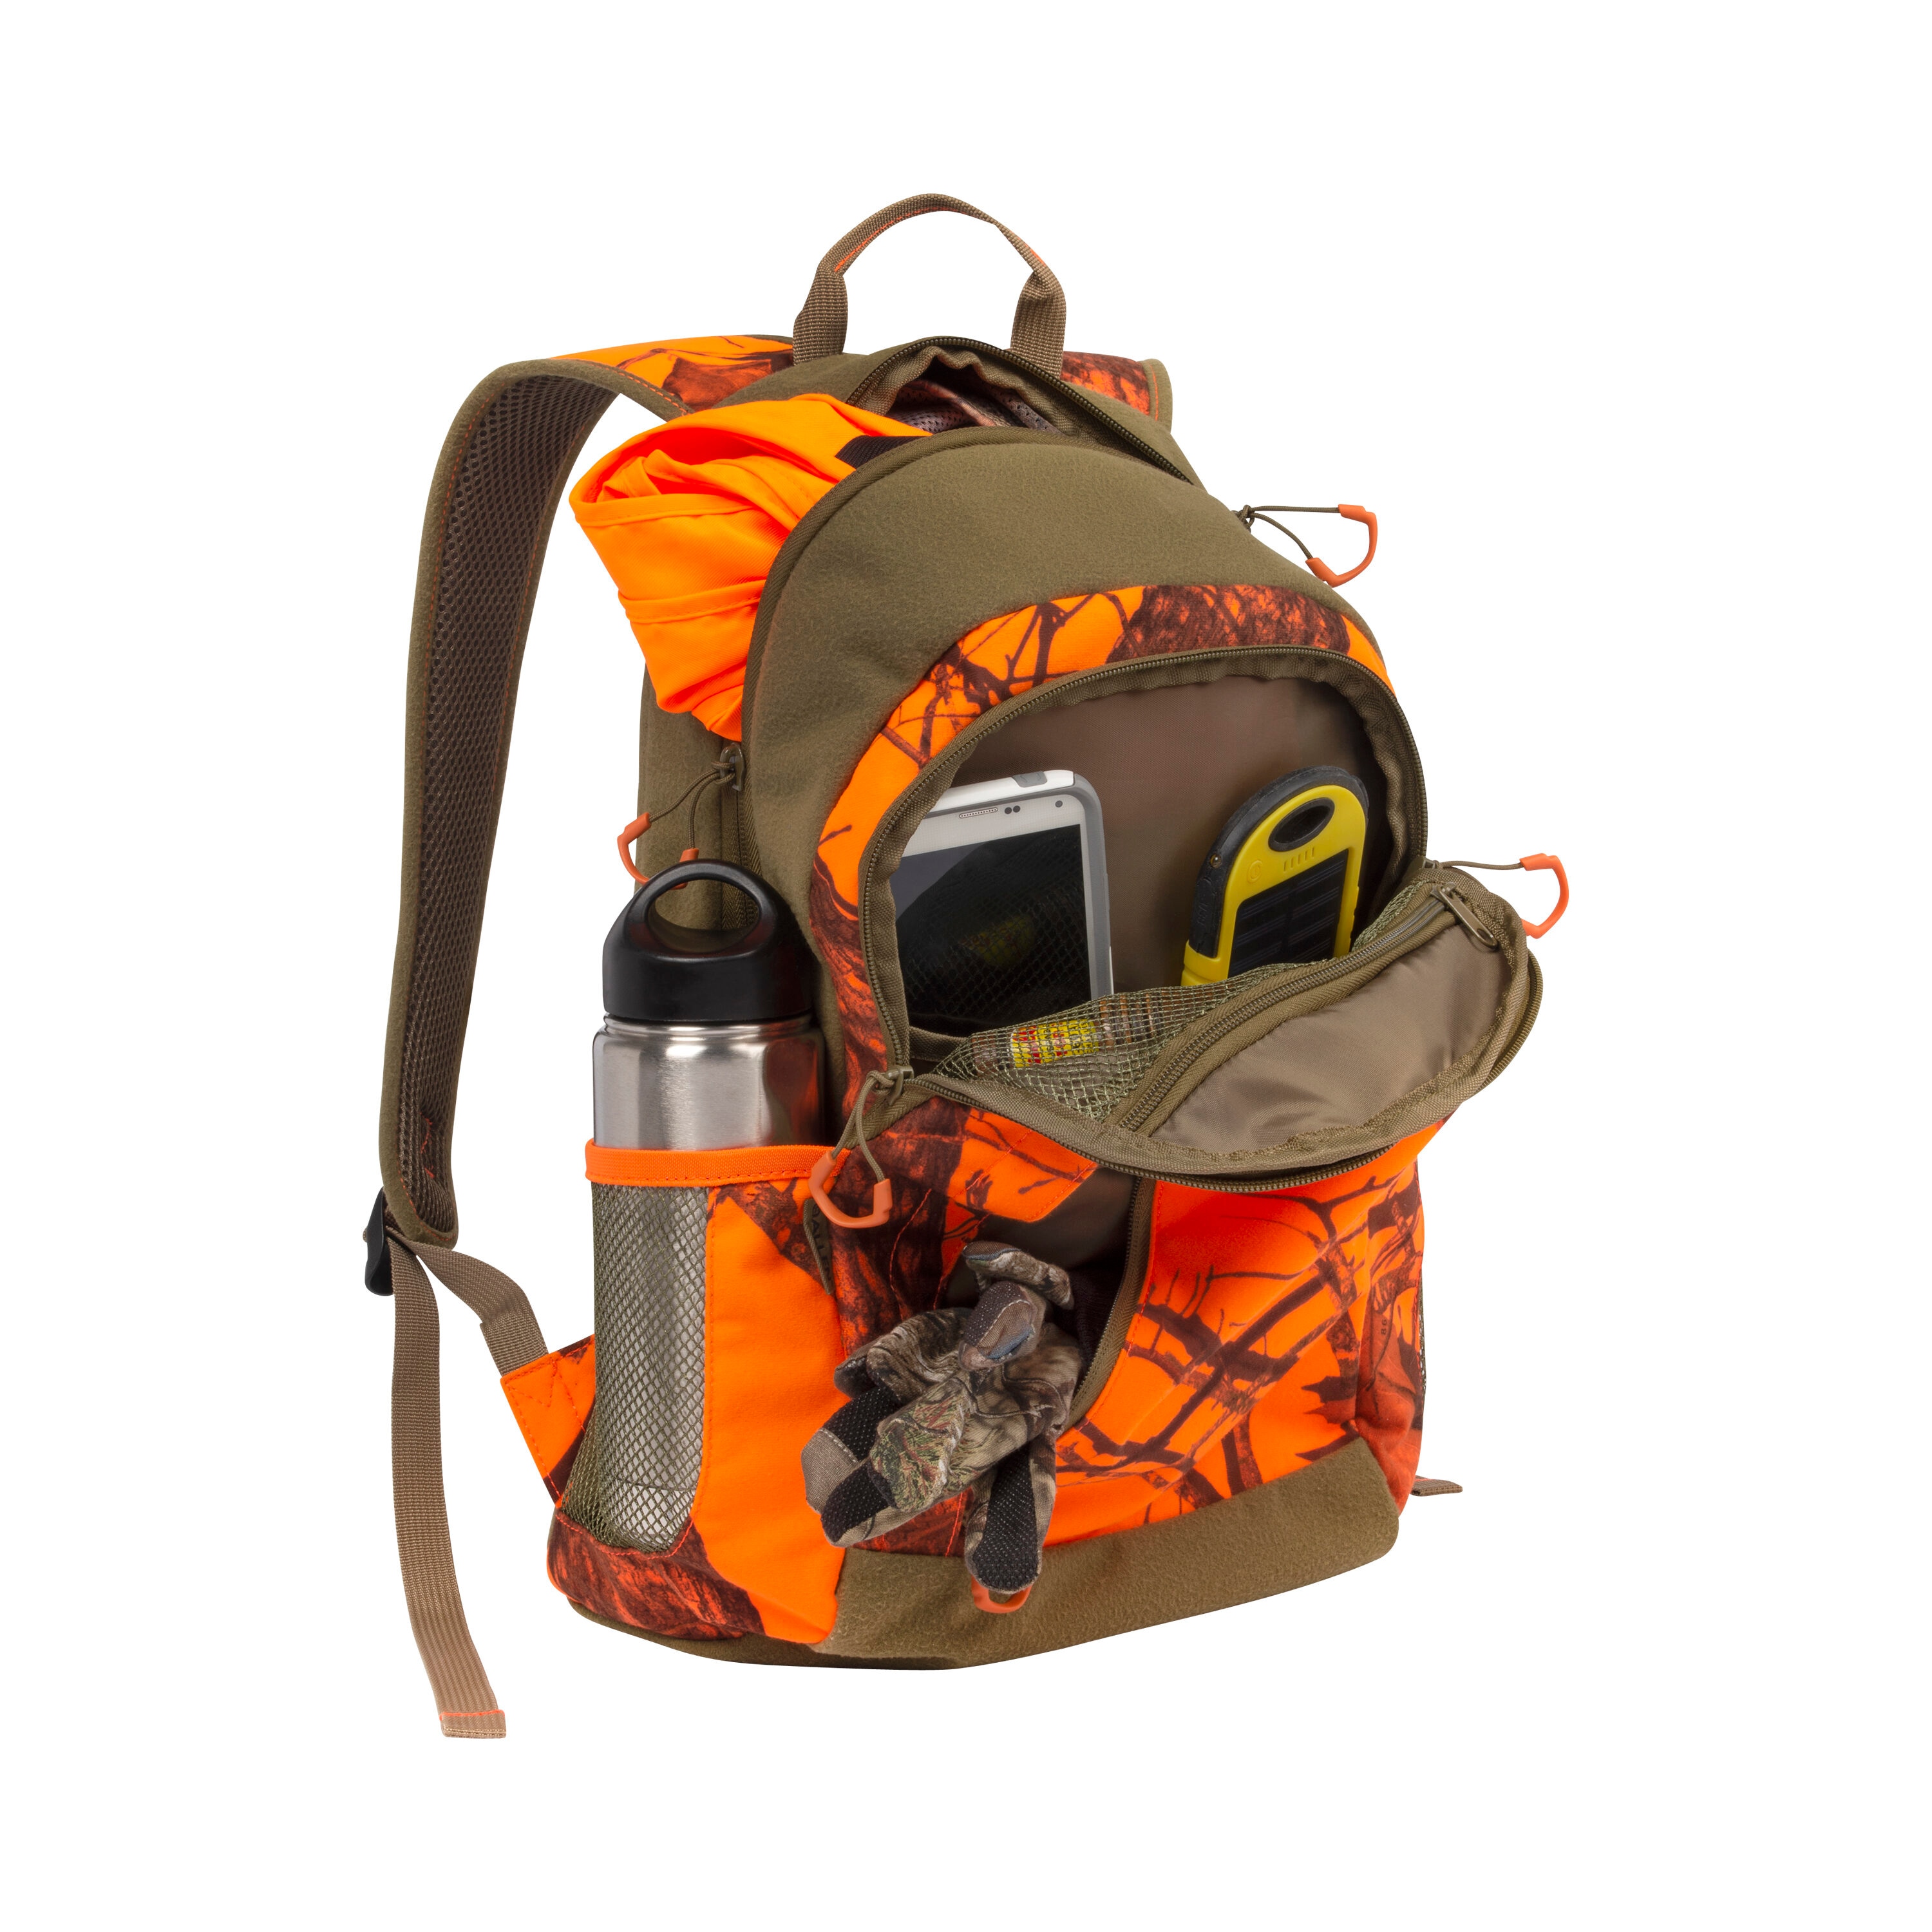 Terrain Mossy Oak Break-Up Blaze Camo Hunting Backpack, Durable and Silent,  2 Large Compartments, Water Bottle Pockets, Adjustable Straps in the  Hunting Equipment & Apparel department at